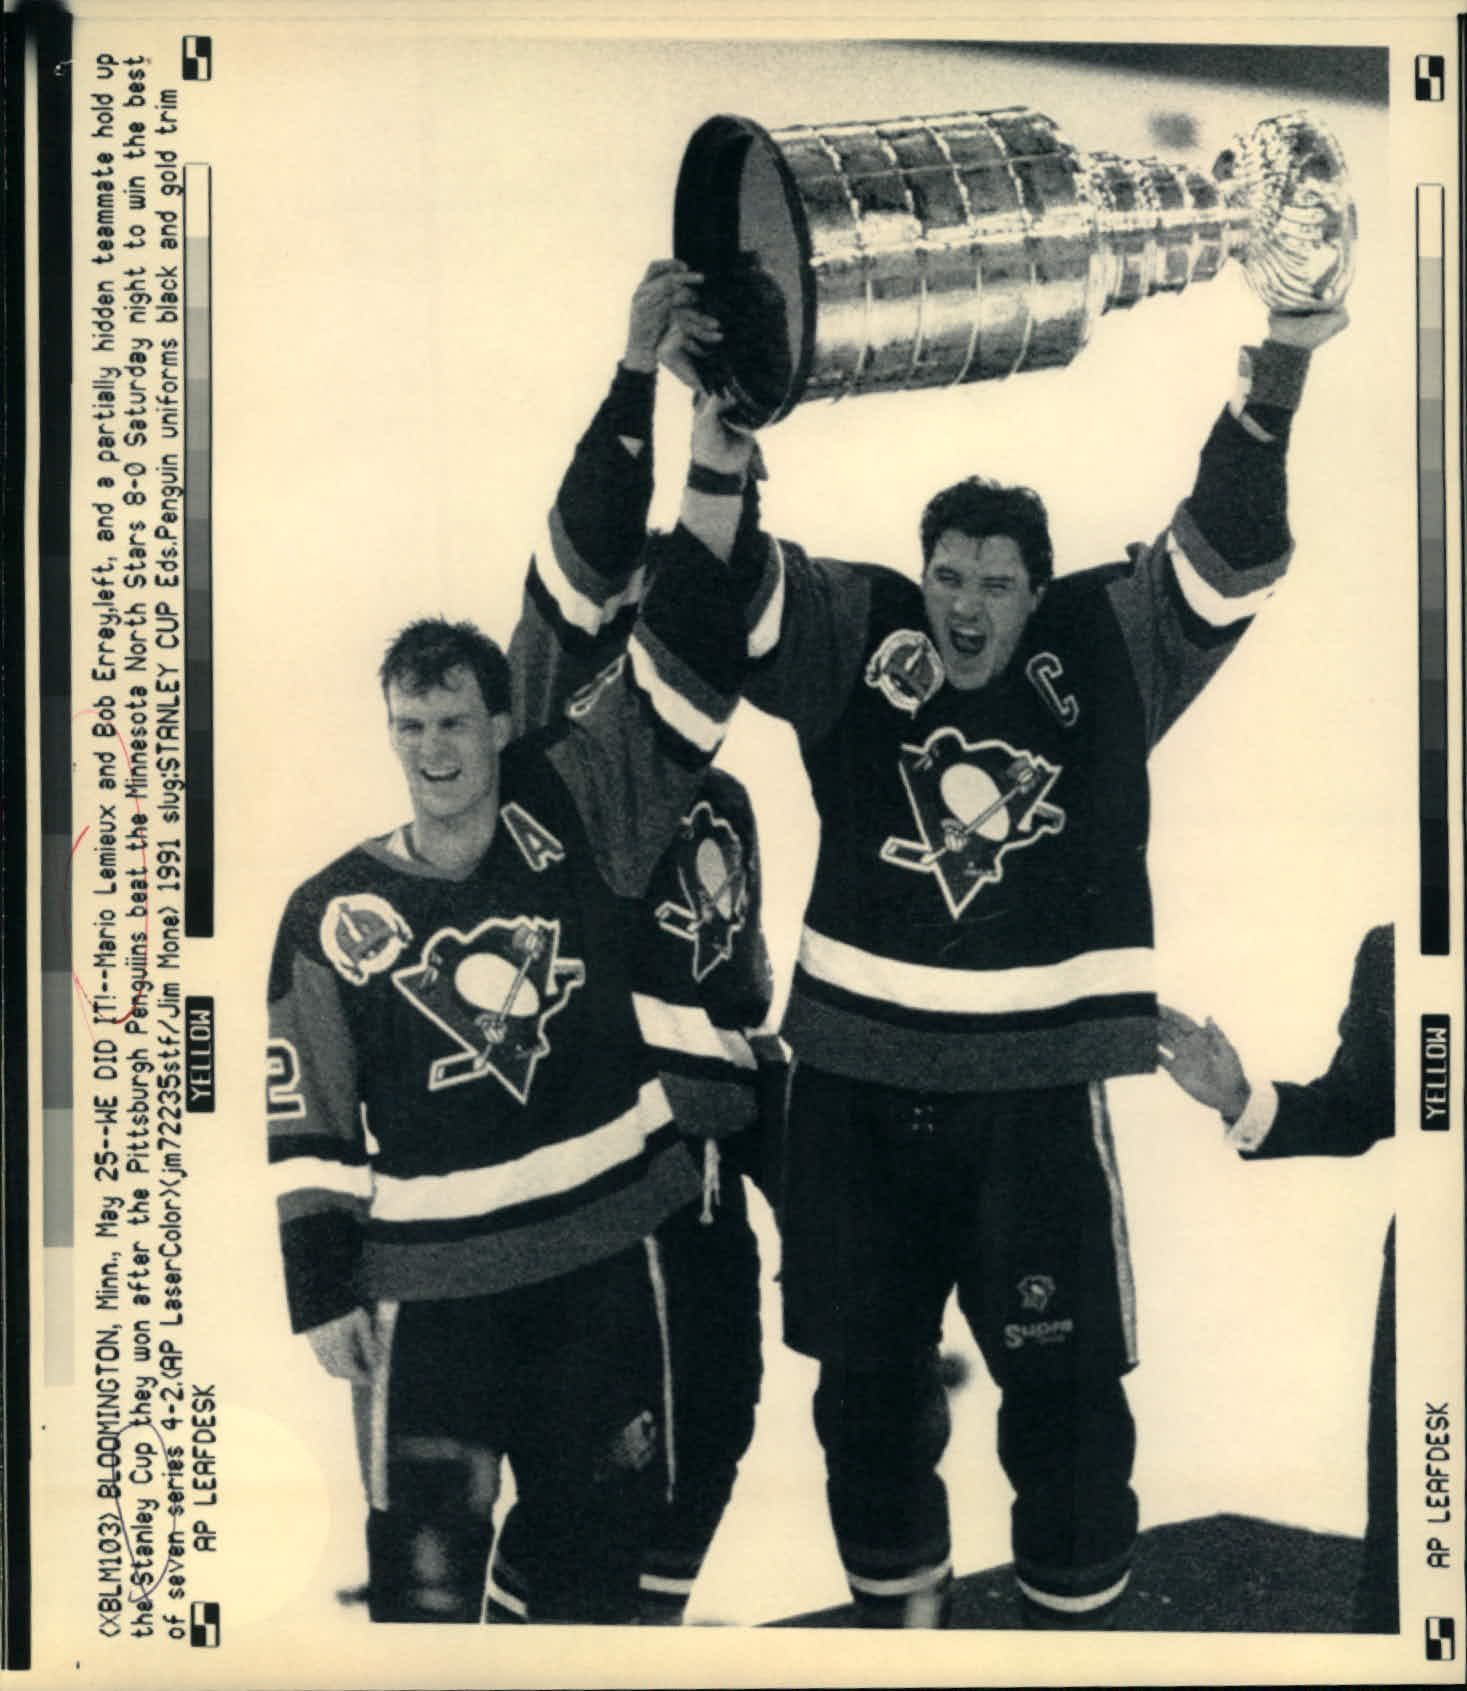 1991-92 Pittsburgh Penguins Stanley Cup Champs poster  Pittsburgh Sports  Gallery Mr Bills Sports Collectible Memorabilia